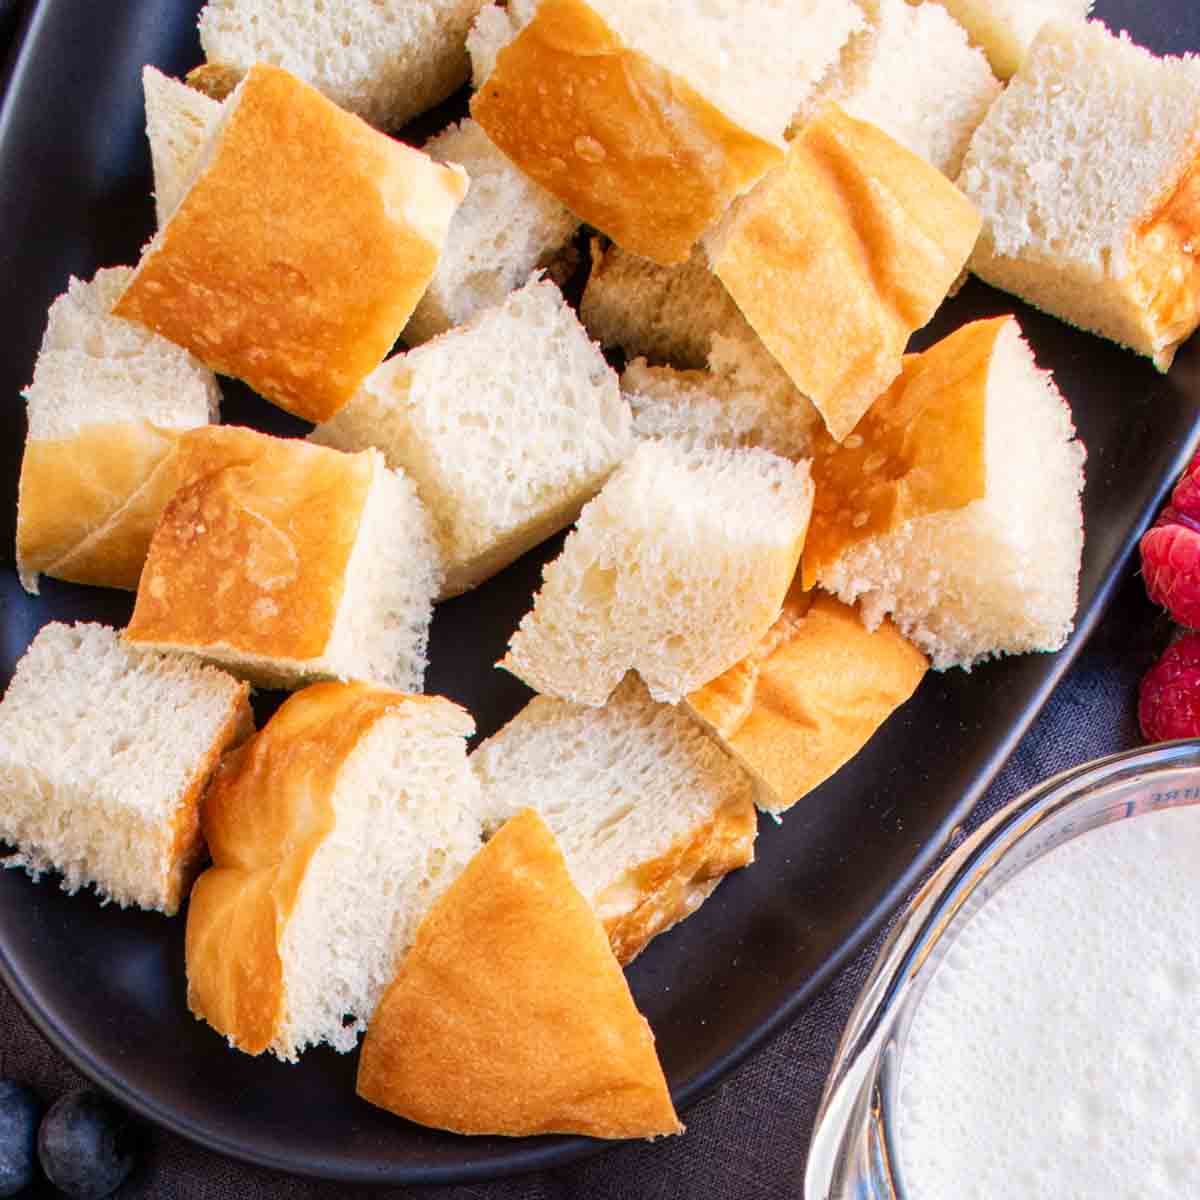 Bread cubes on a black plate with berries and milk for Overnight French Toast Bake